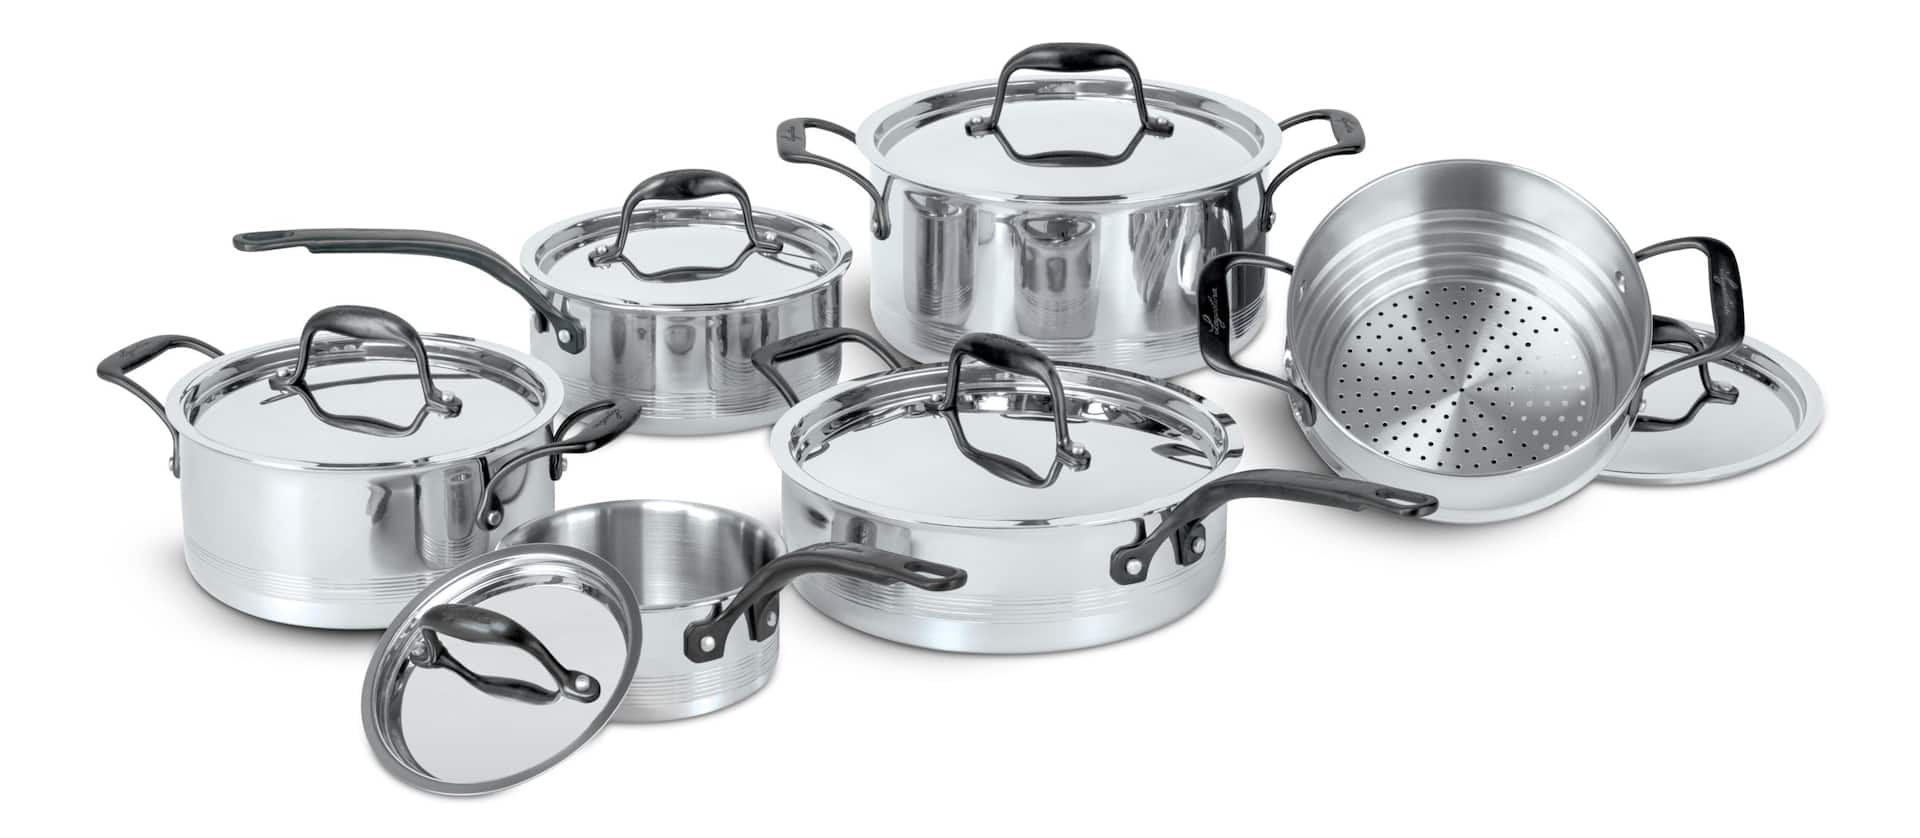 Lagostina 12pc 7ply Stainless Steel Cookset E4f781c1 7cef 4931 975f F23d4aee92b0 Jpgrendition 